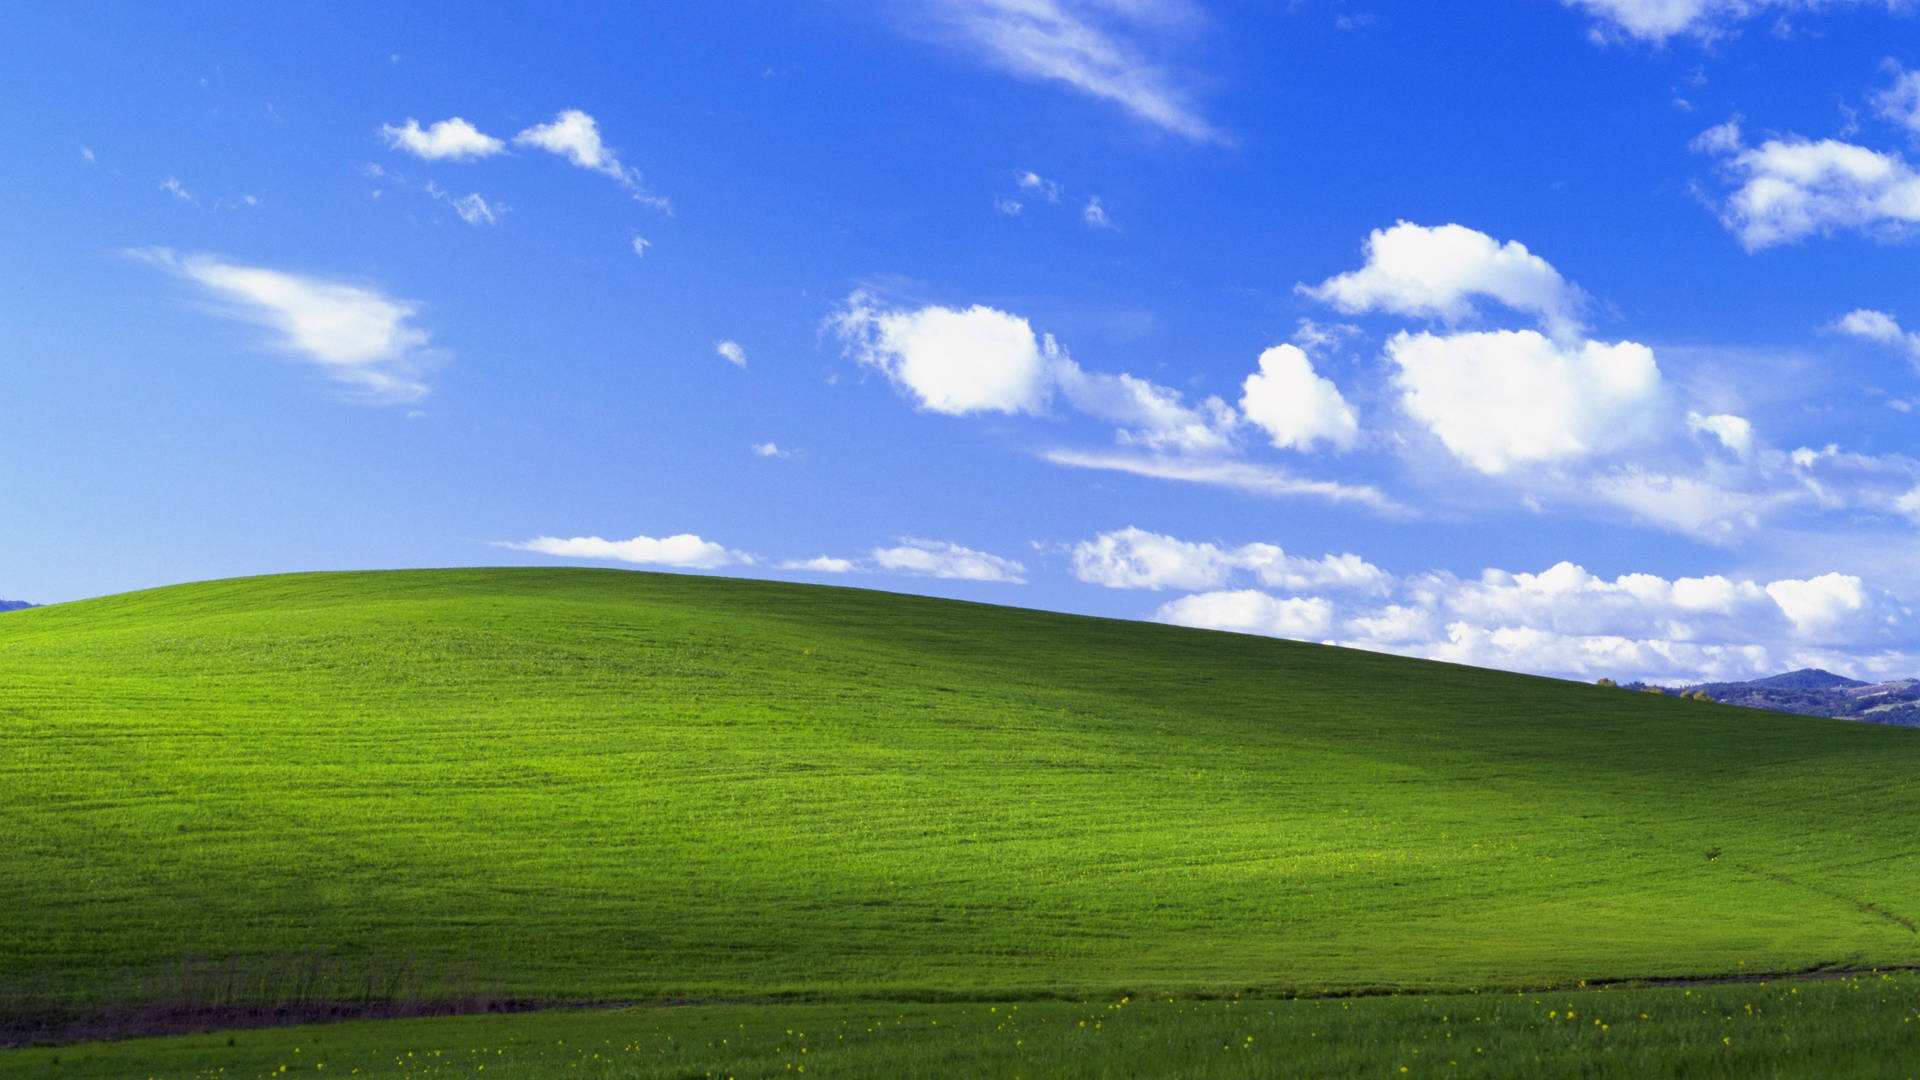 Windows Xp 3840X2160 Wallpaper and Background Image